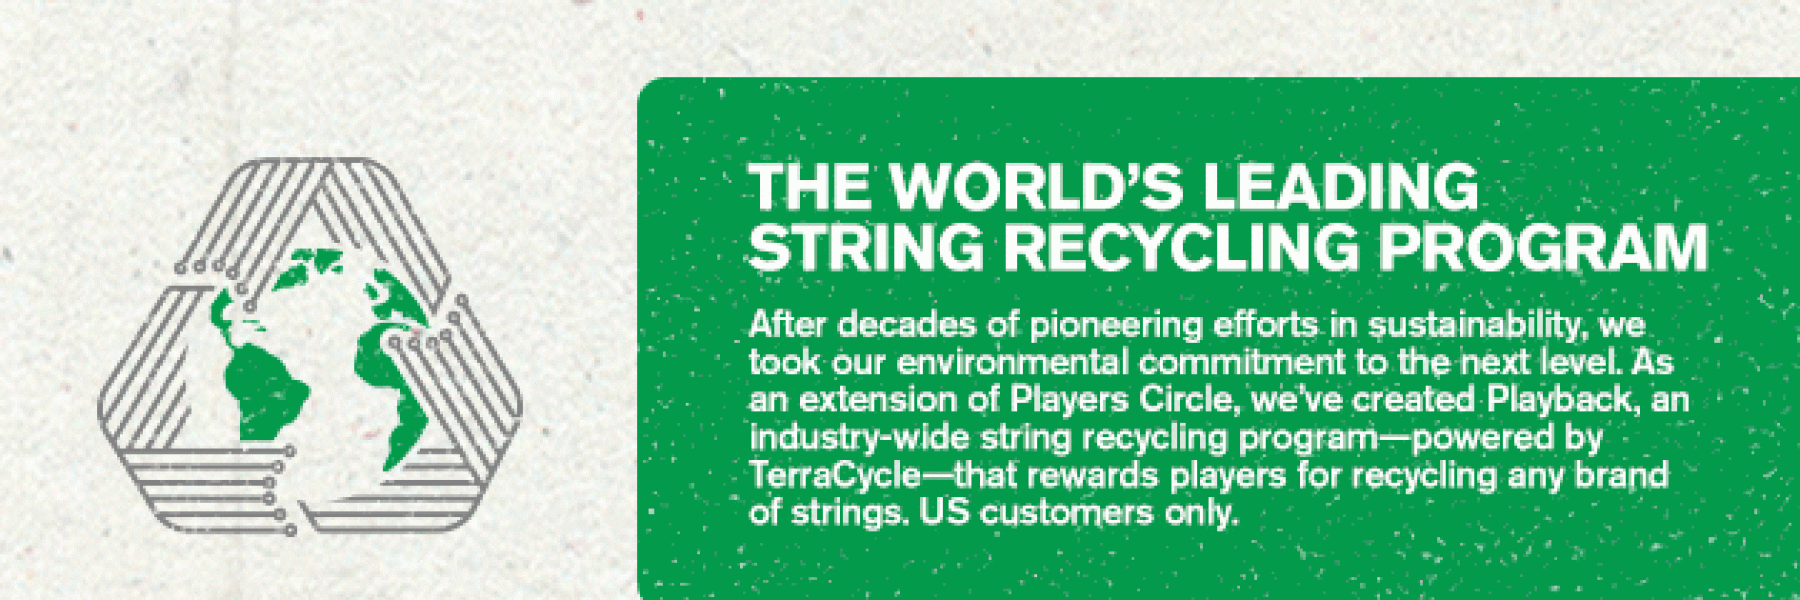 Anthony Mantova believes recycling strings is a great way for guitar players to 'give back.'